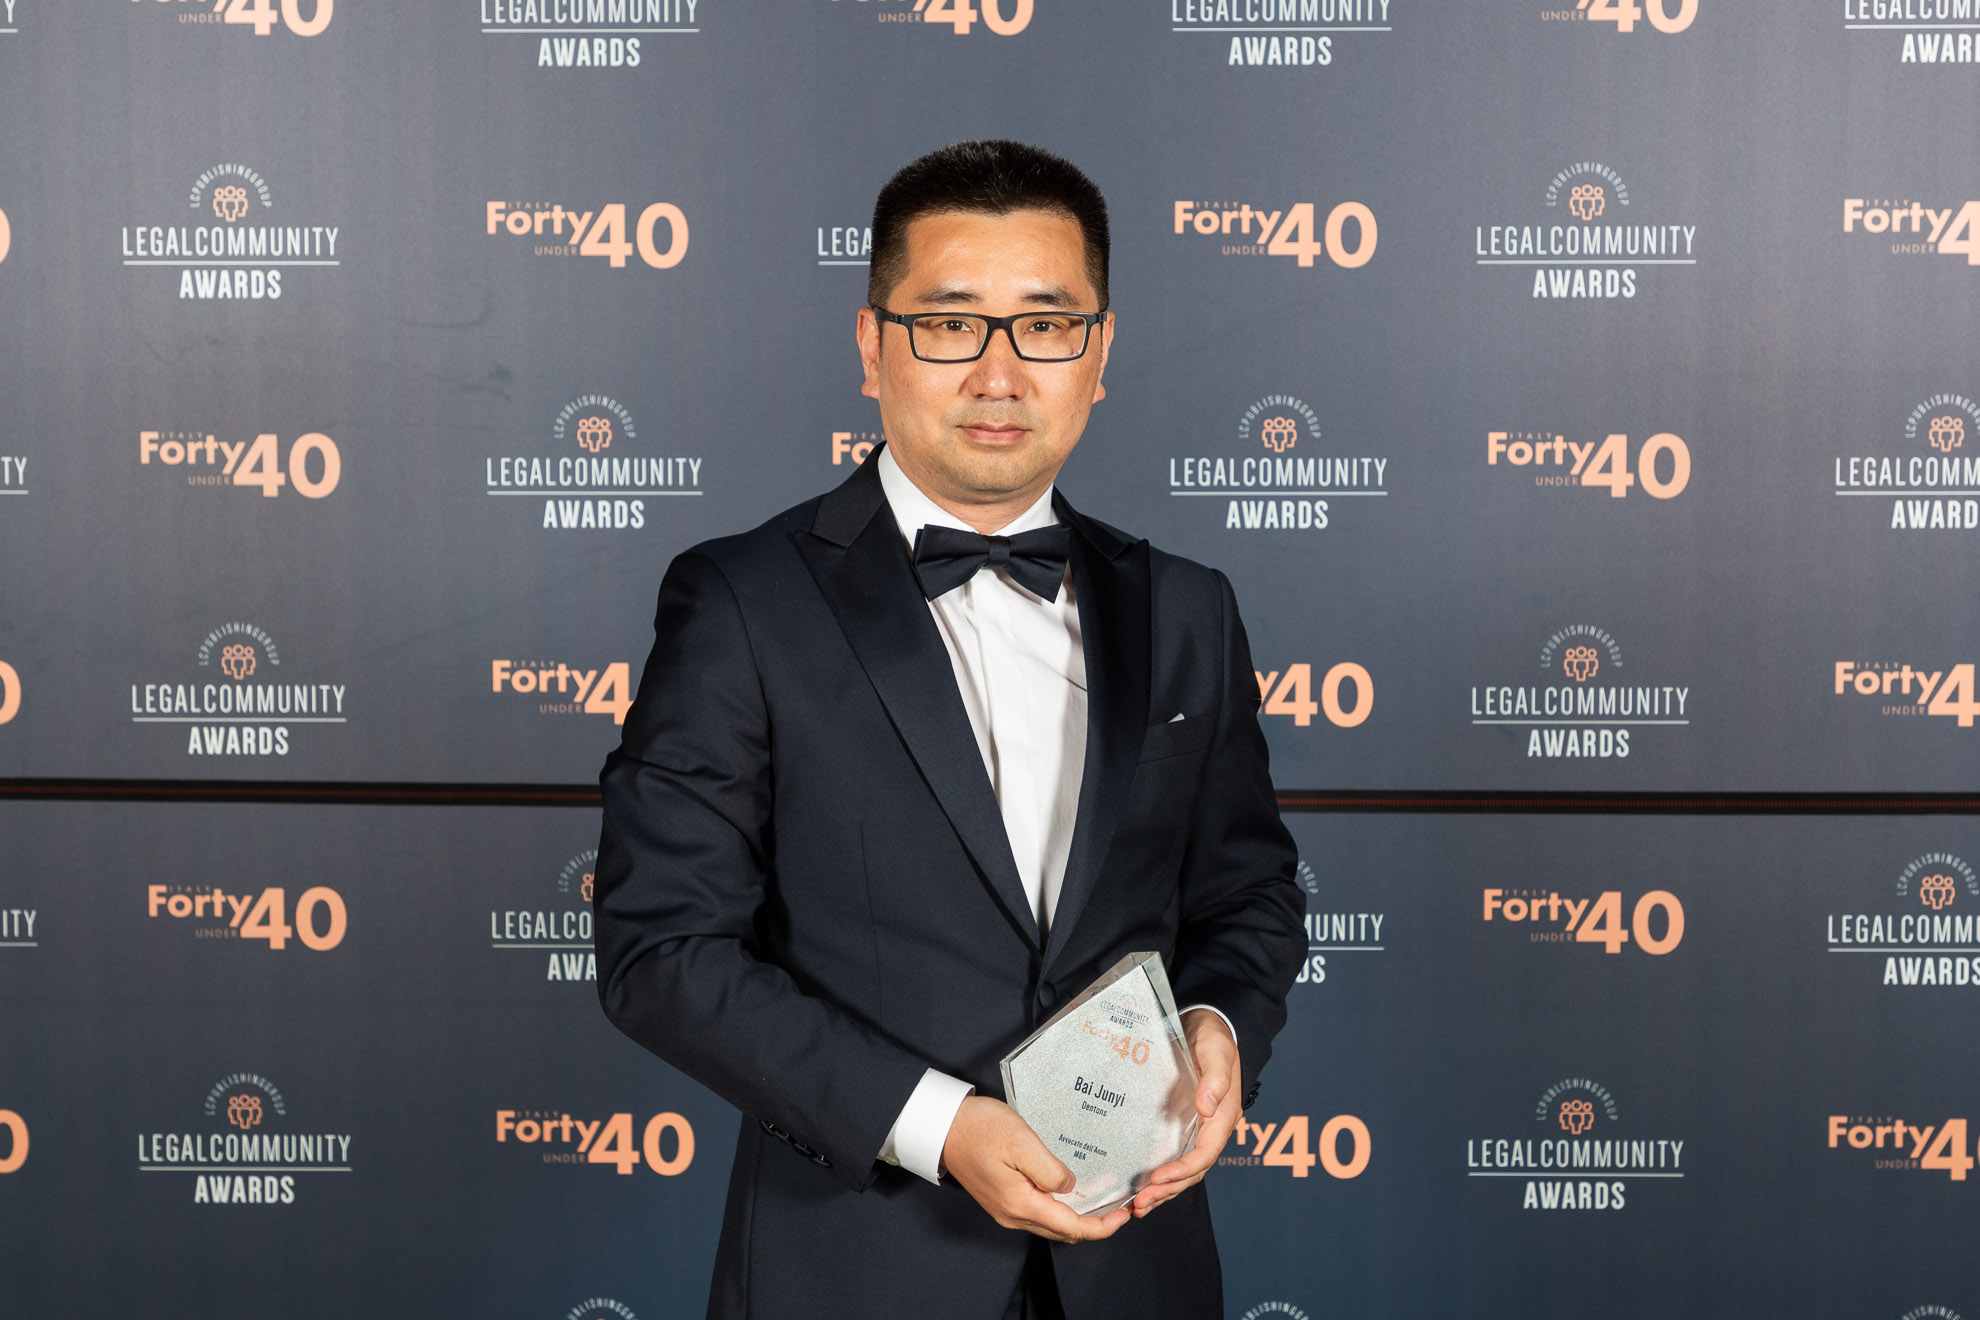 Junyi Bai named “Lawyer of the year - M&A"